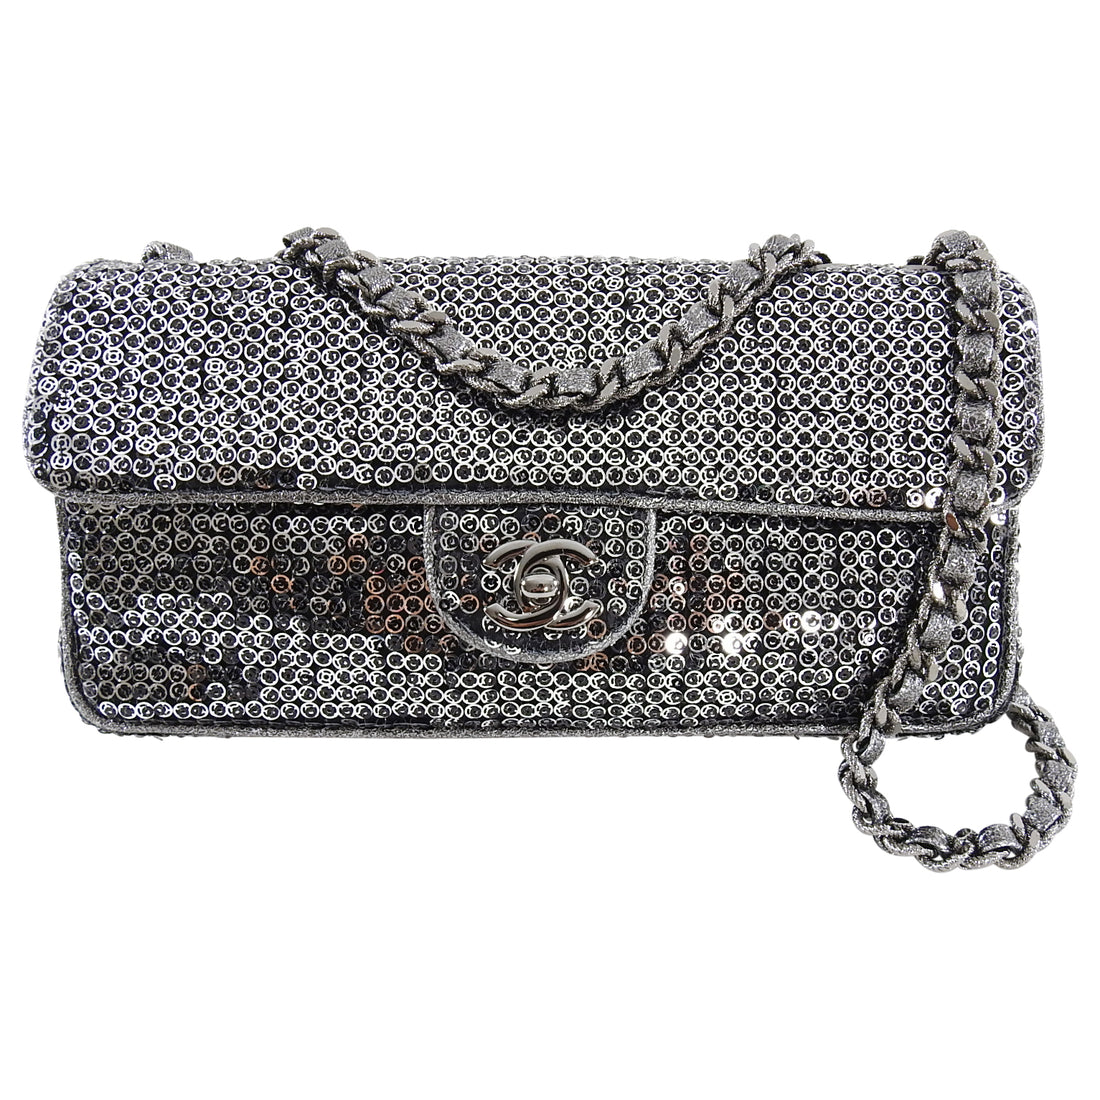 Chanel Silver Bag - 1,152 For Sale on 1stDibs  silver chanel bag, chanel  handbag silver chain, chanel black bag silver chain